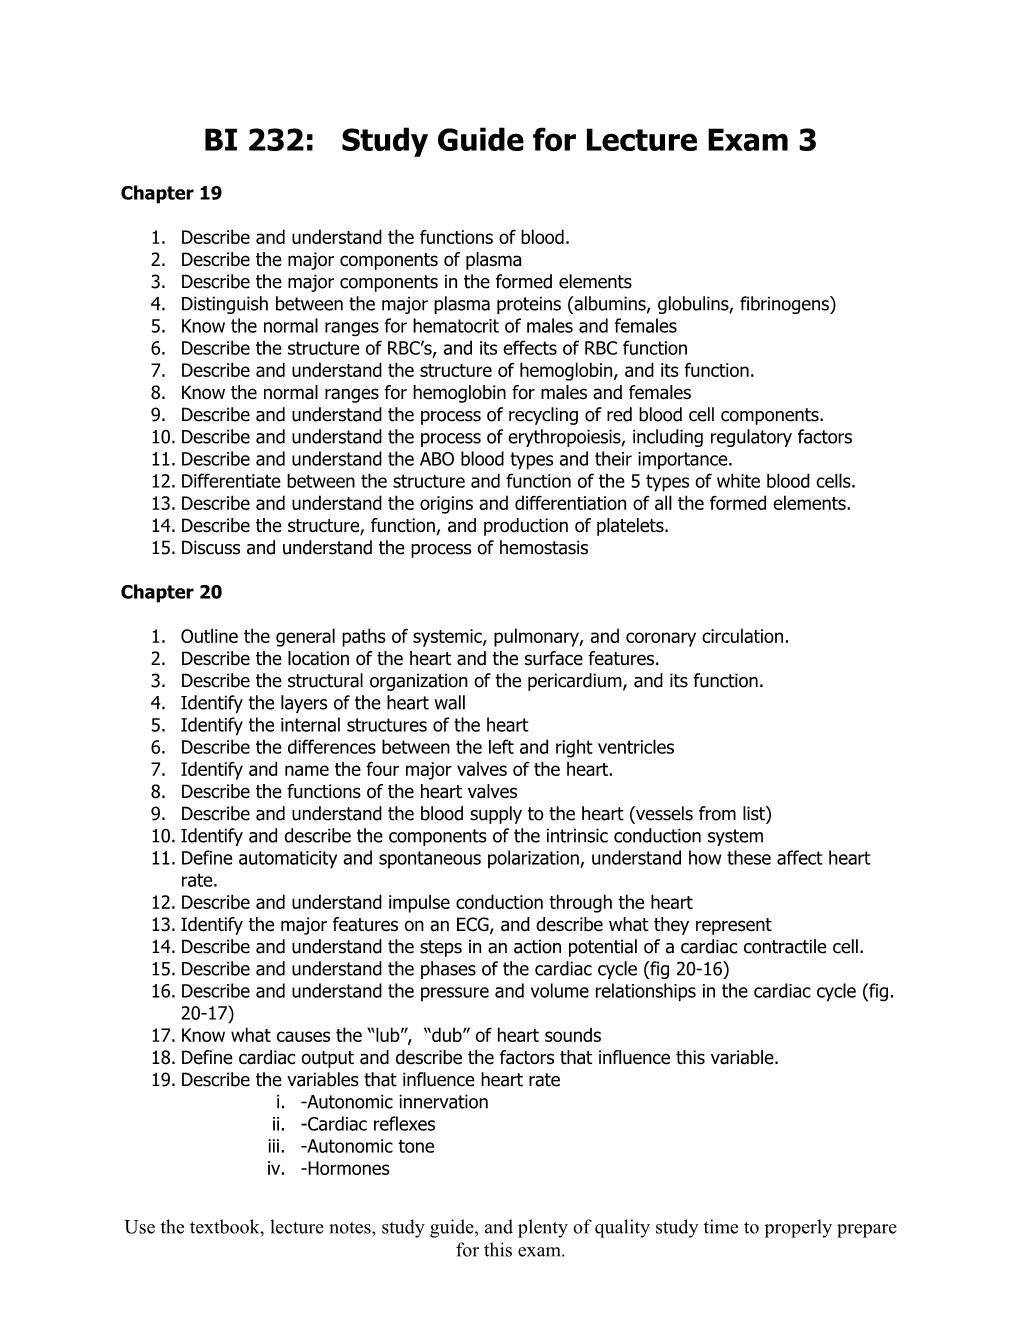 BI 1232: Study Guide for Lecture Exam 3